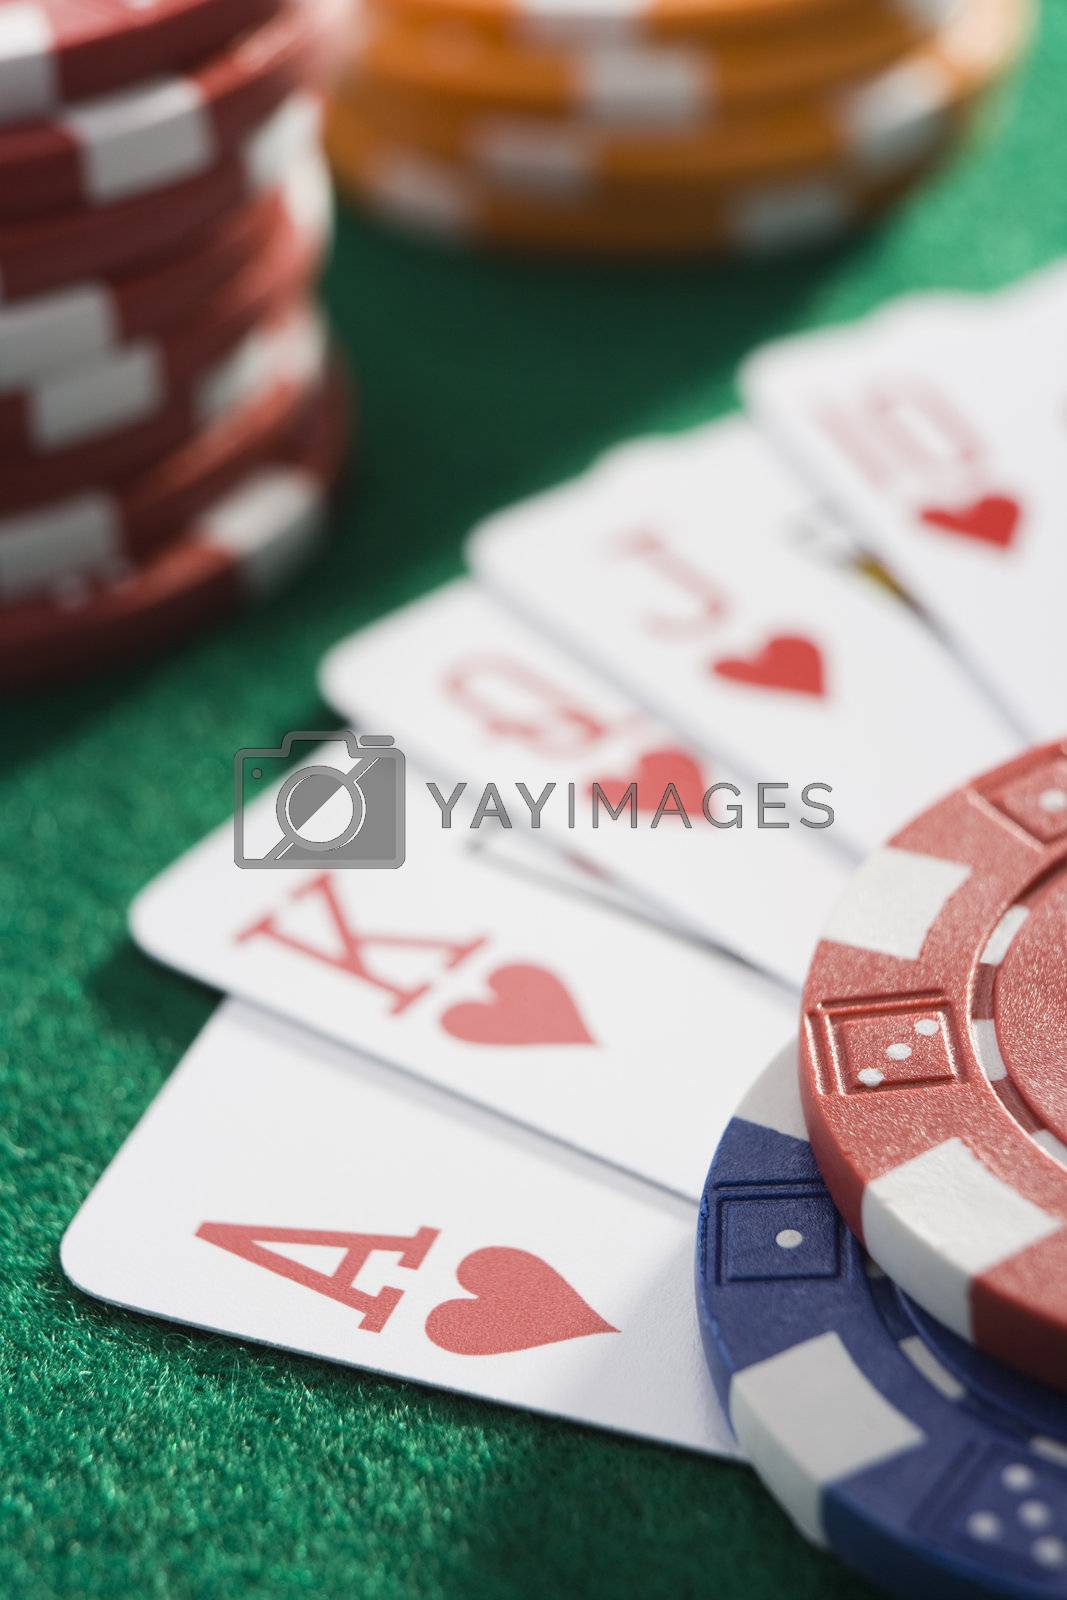 Royalty free image of Playing cards making royal flush in hearts by poker chips by MonkeyBusiness